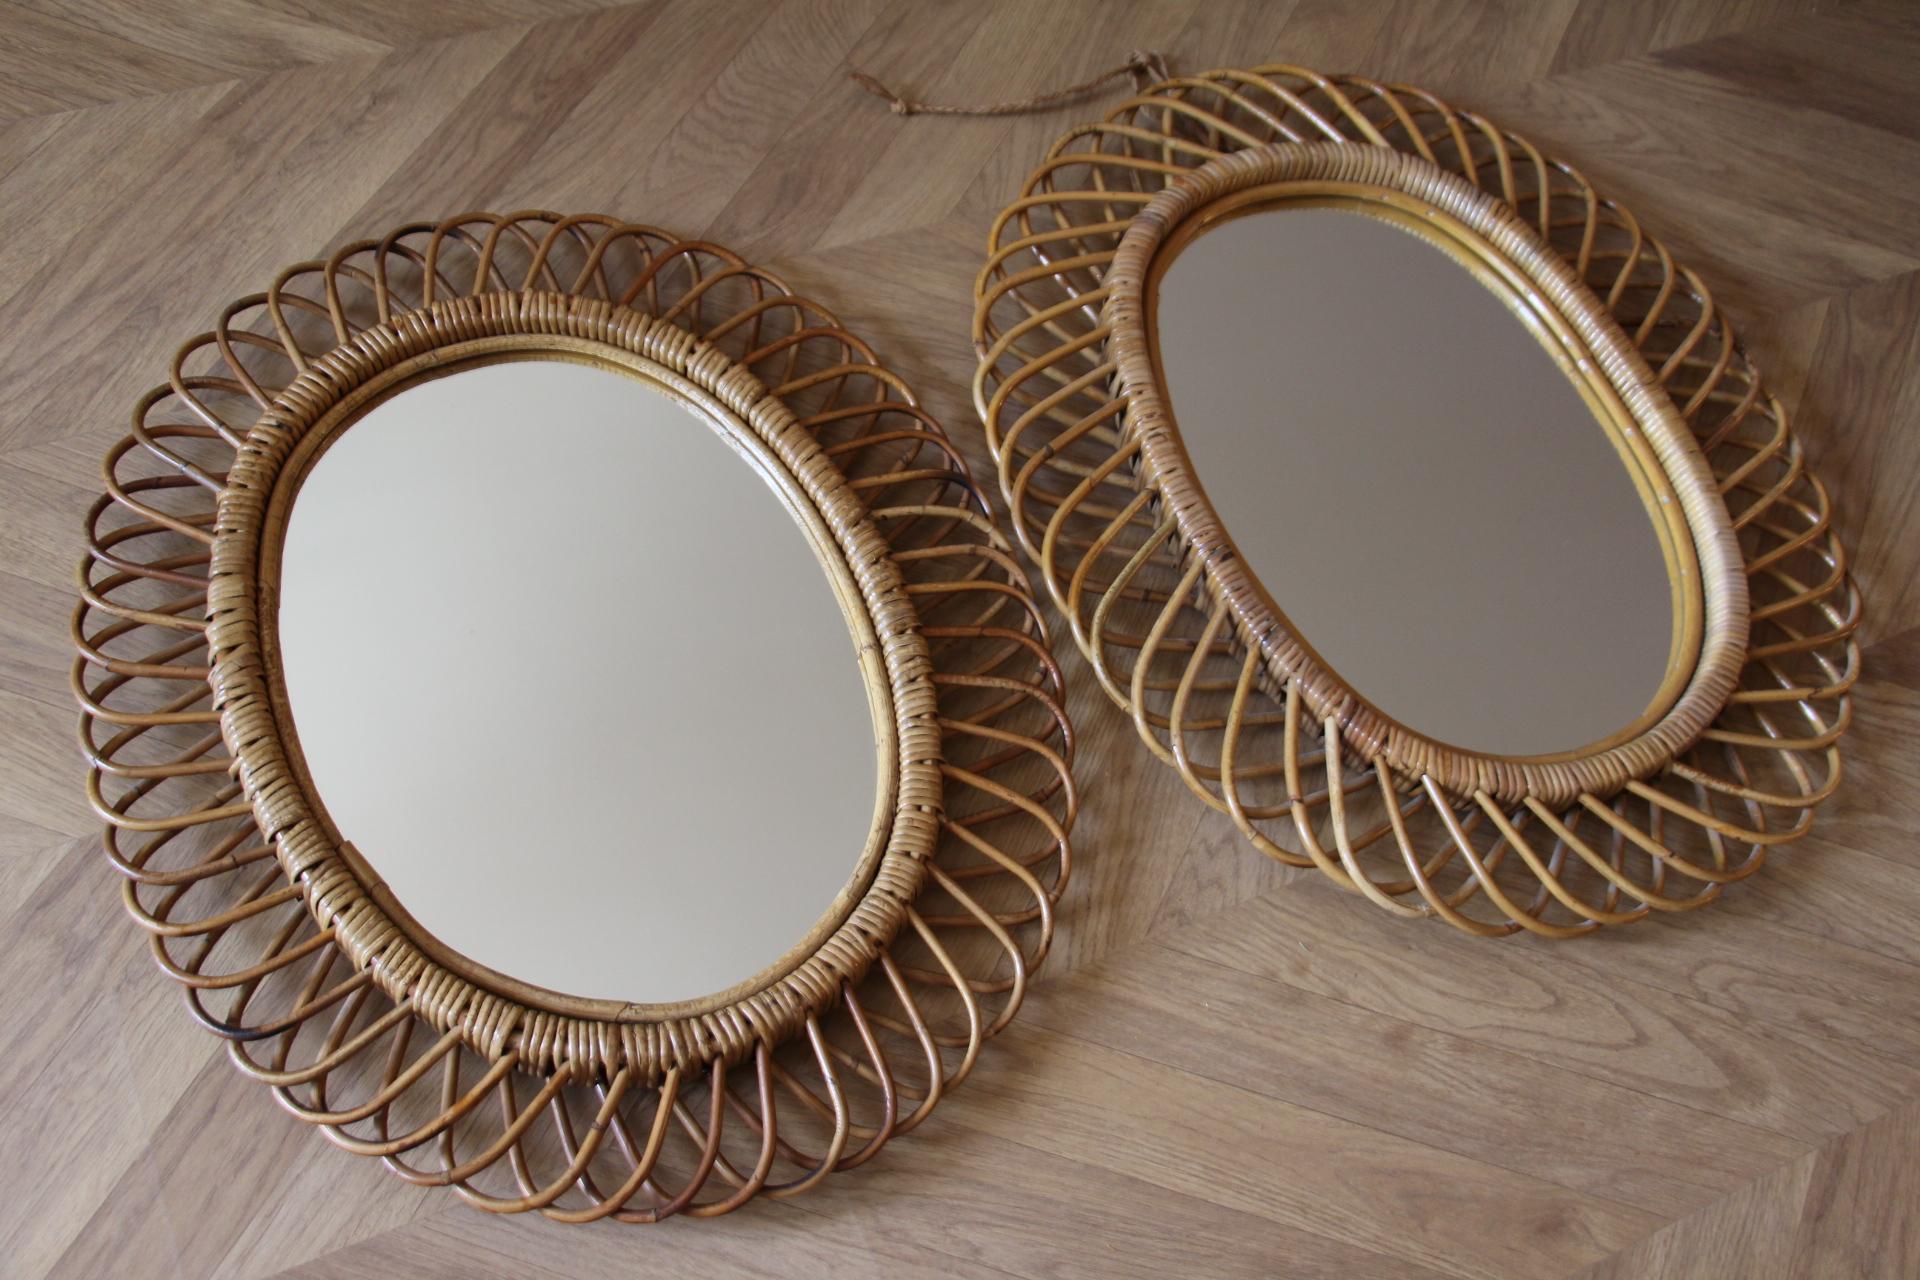 Pair of Vintage 1960s Rattan and Bamboo Round Wall Mirror by Franco Albini For Sale 6